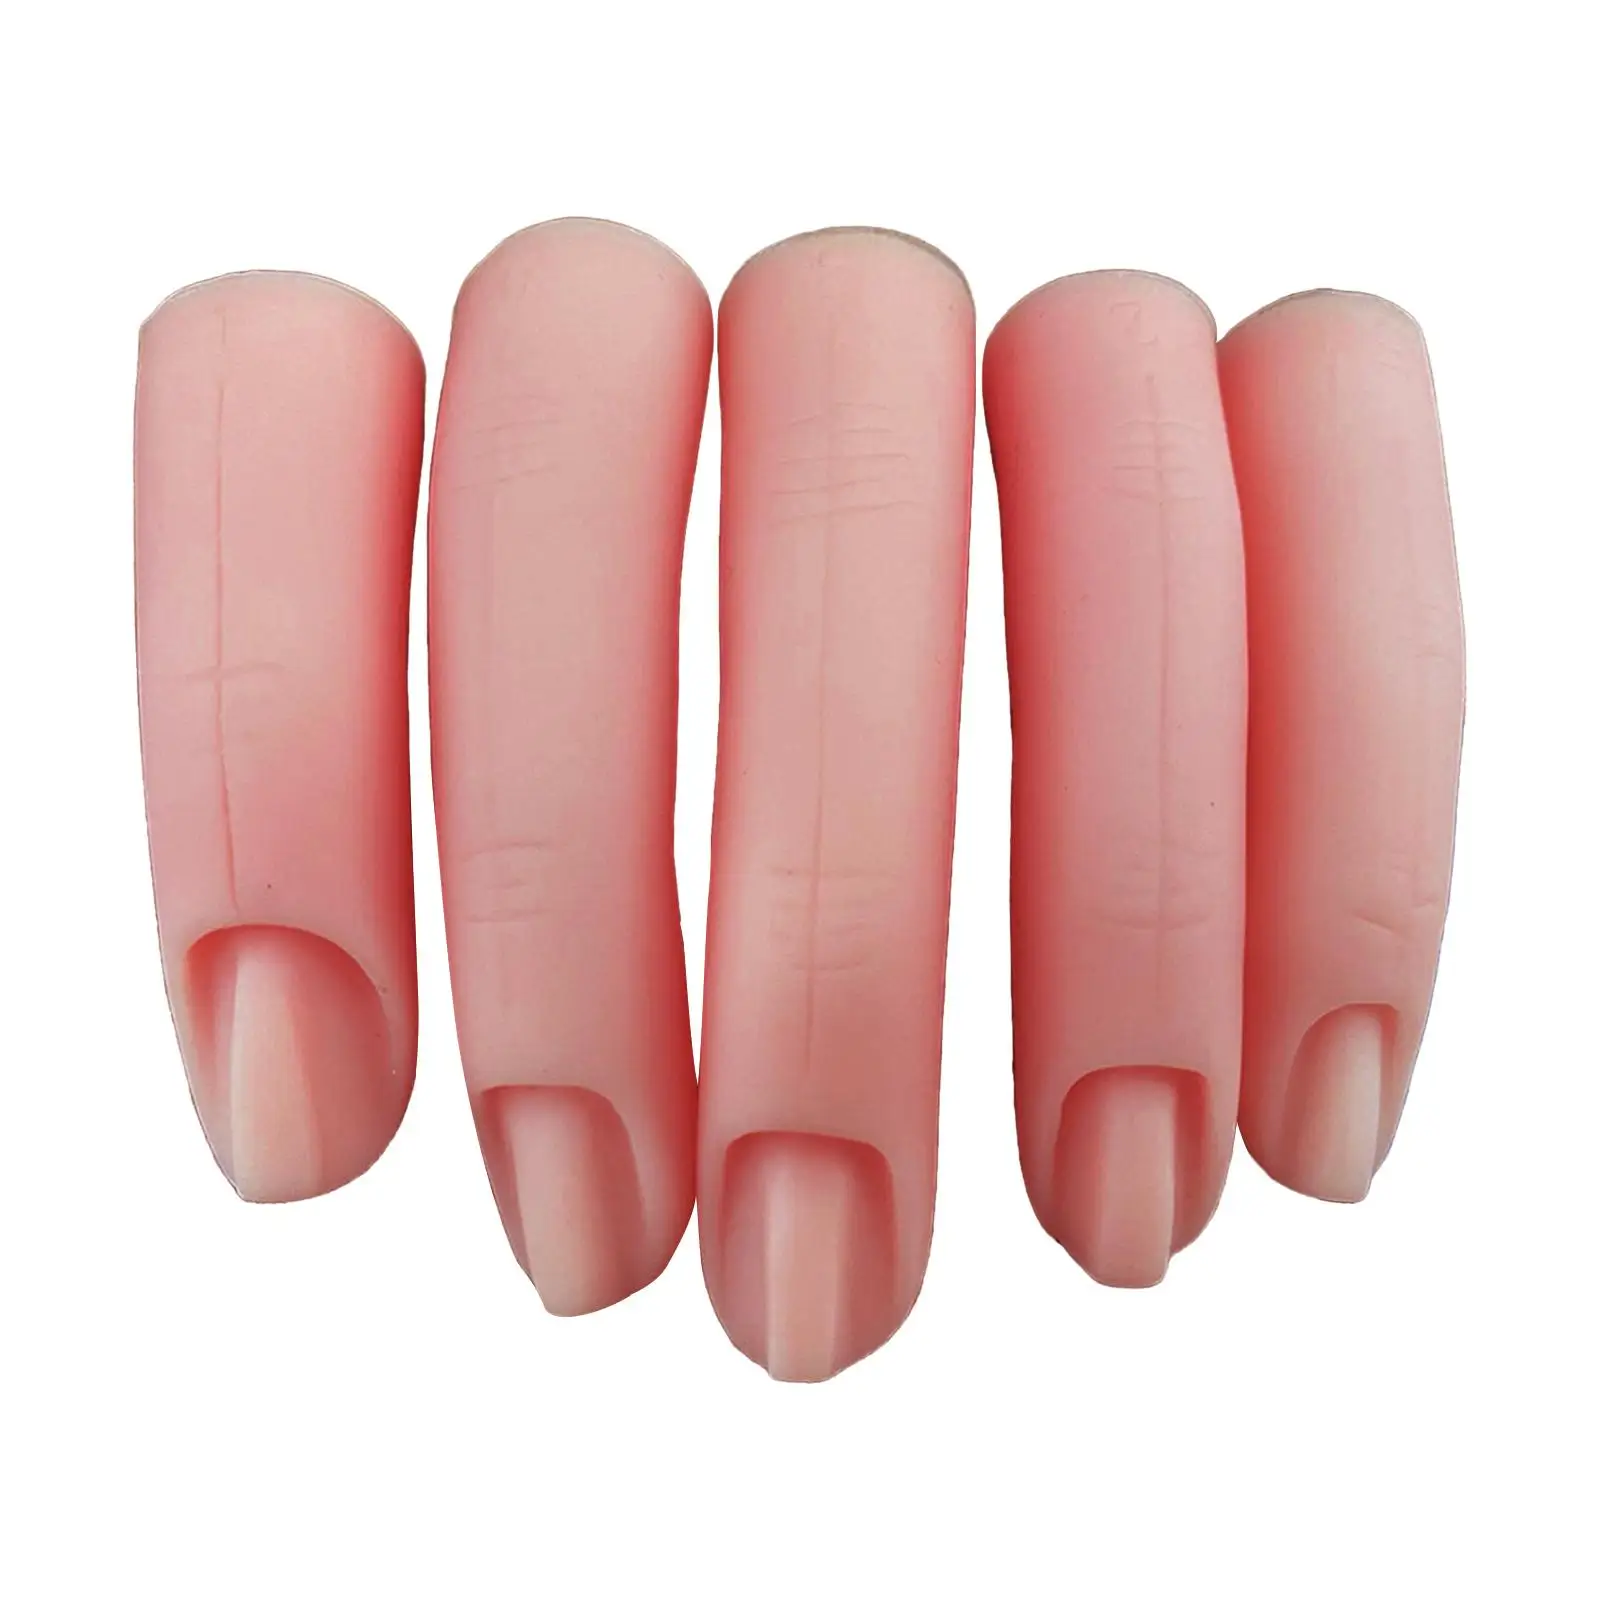 5x Silicone Practice Finger Training Display Tools Fake Finger for Nails Practice